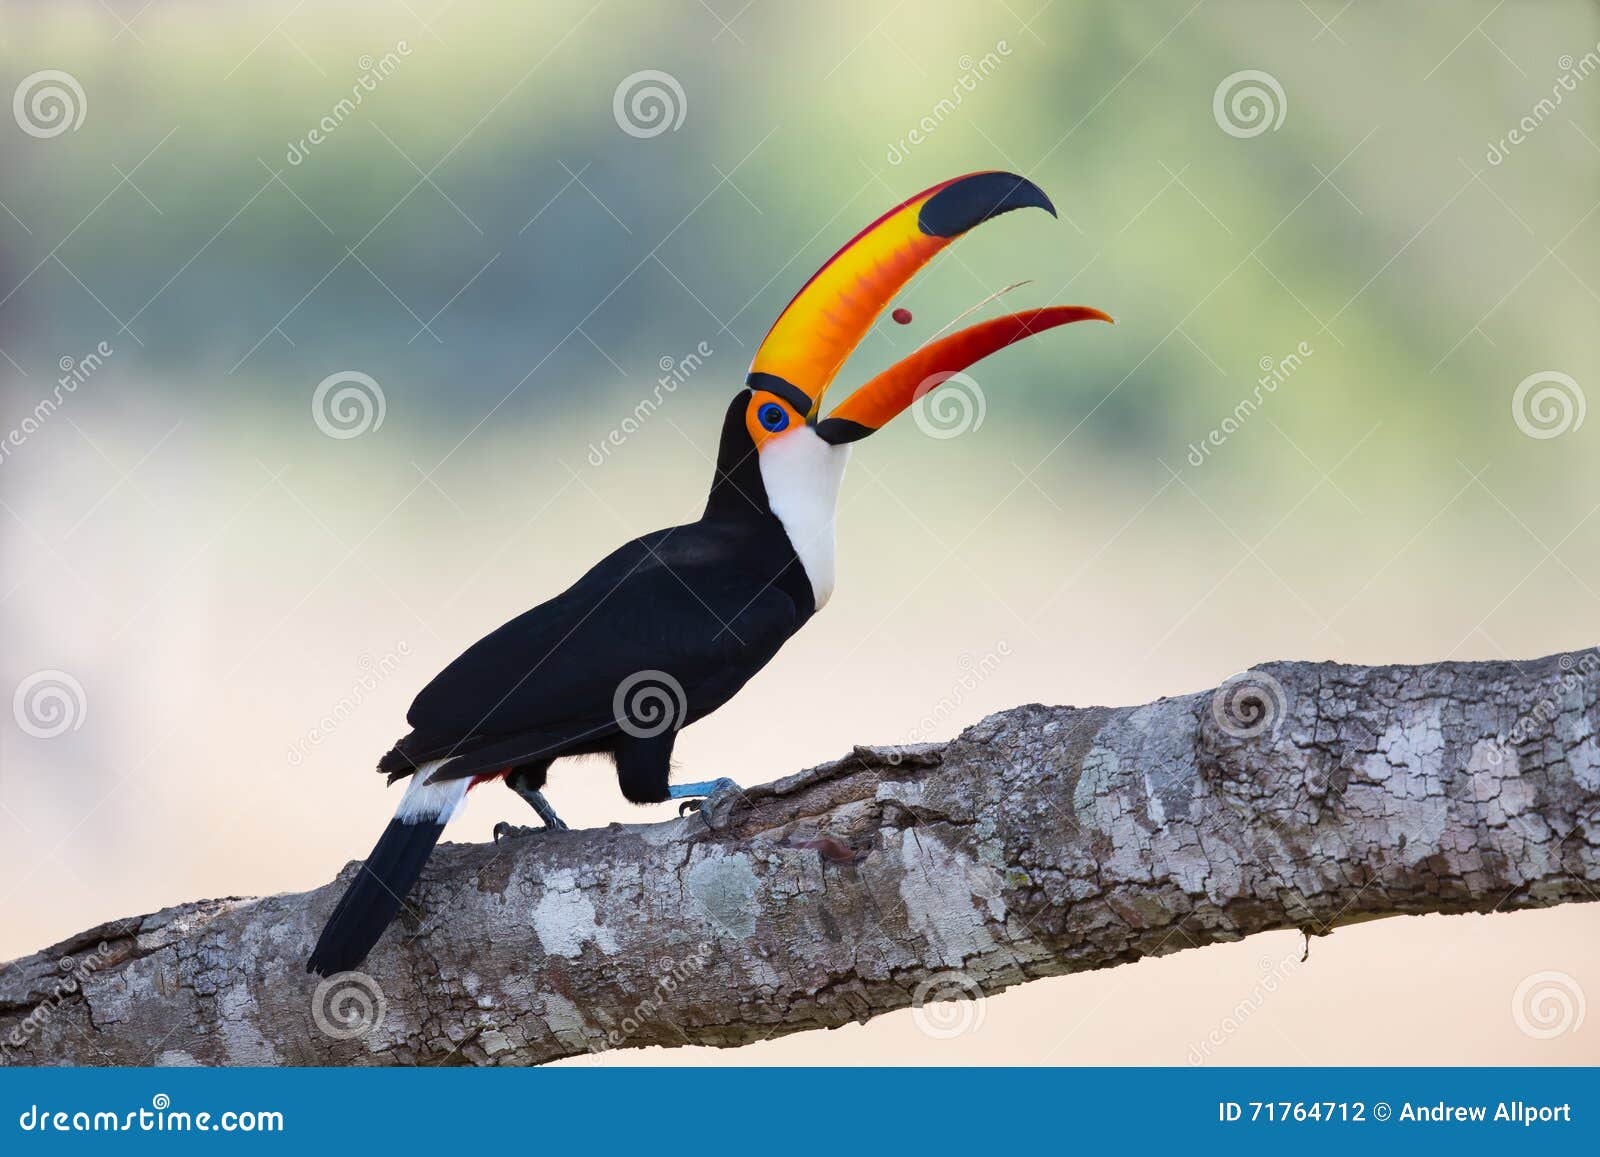 toco toucan tossing a berry